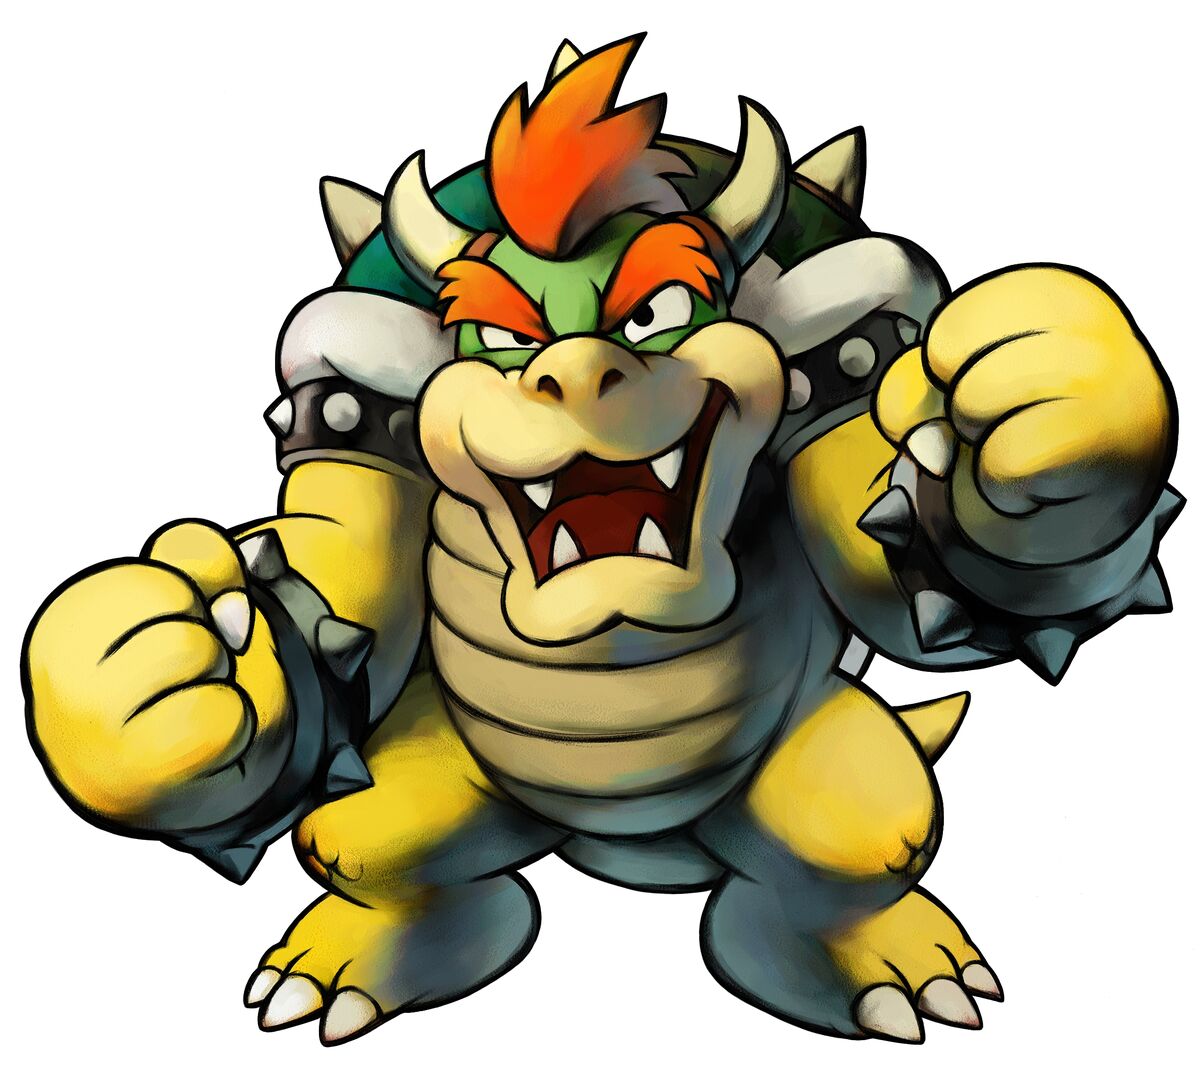 The more I think a out it, the more I could see a lot of similarities between Electra and Bowser, particularly in terms of personality, and ESPECIALLY when it comes to Bowser in the Mario and Luigi games. I could totally see Electra having a personality such as that.